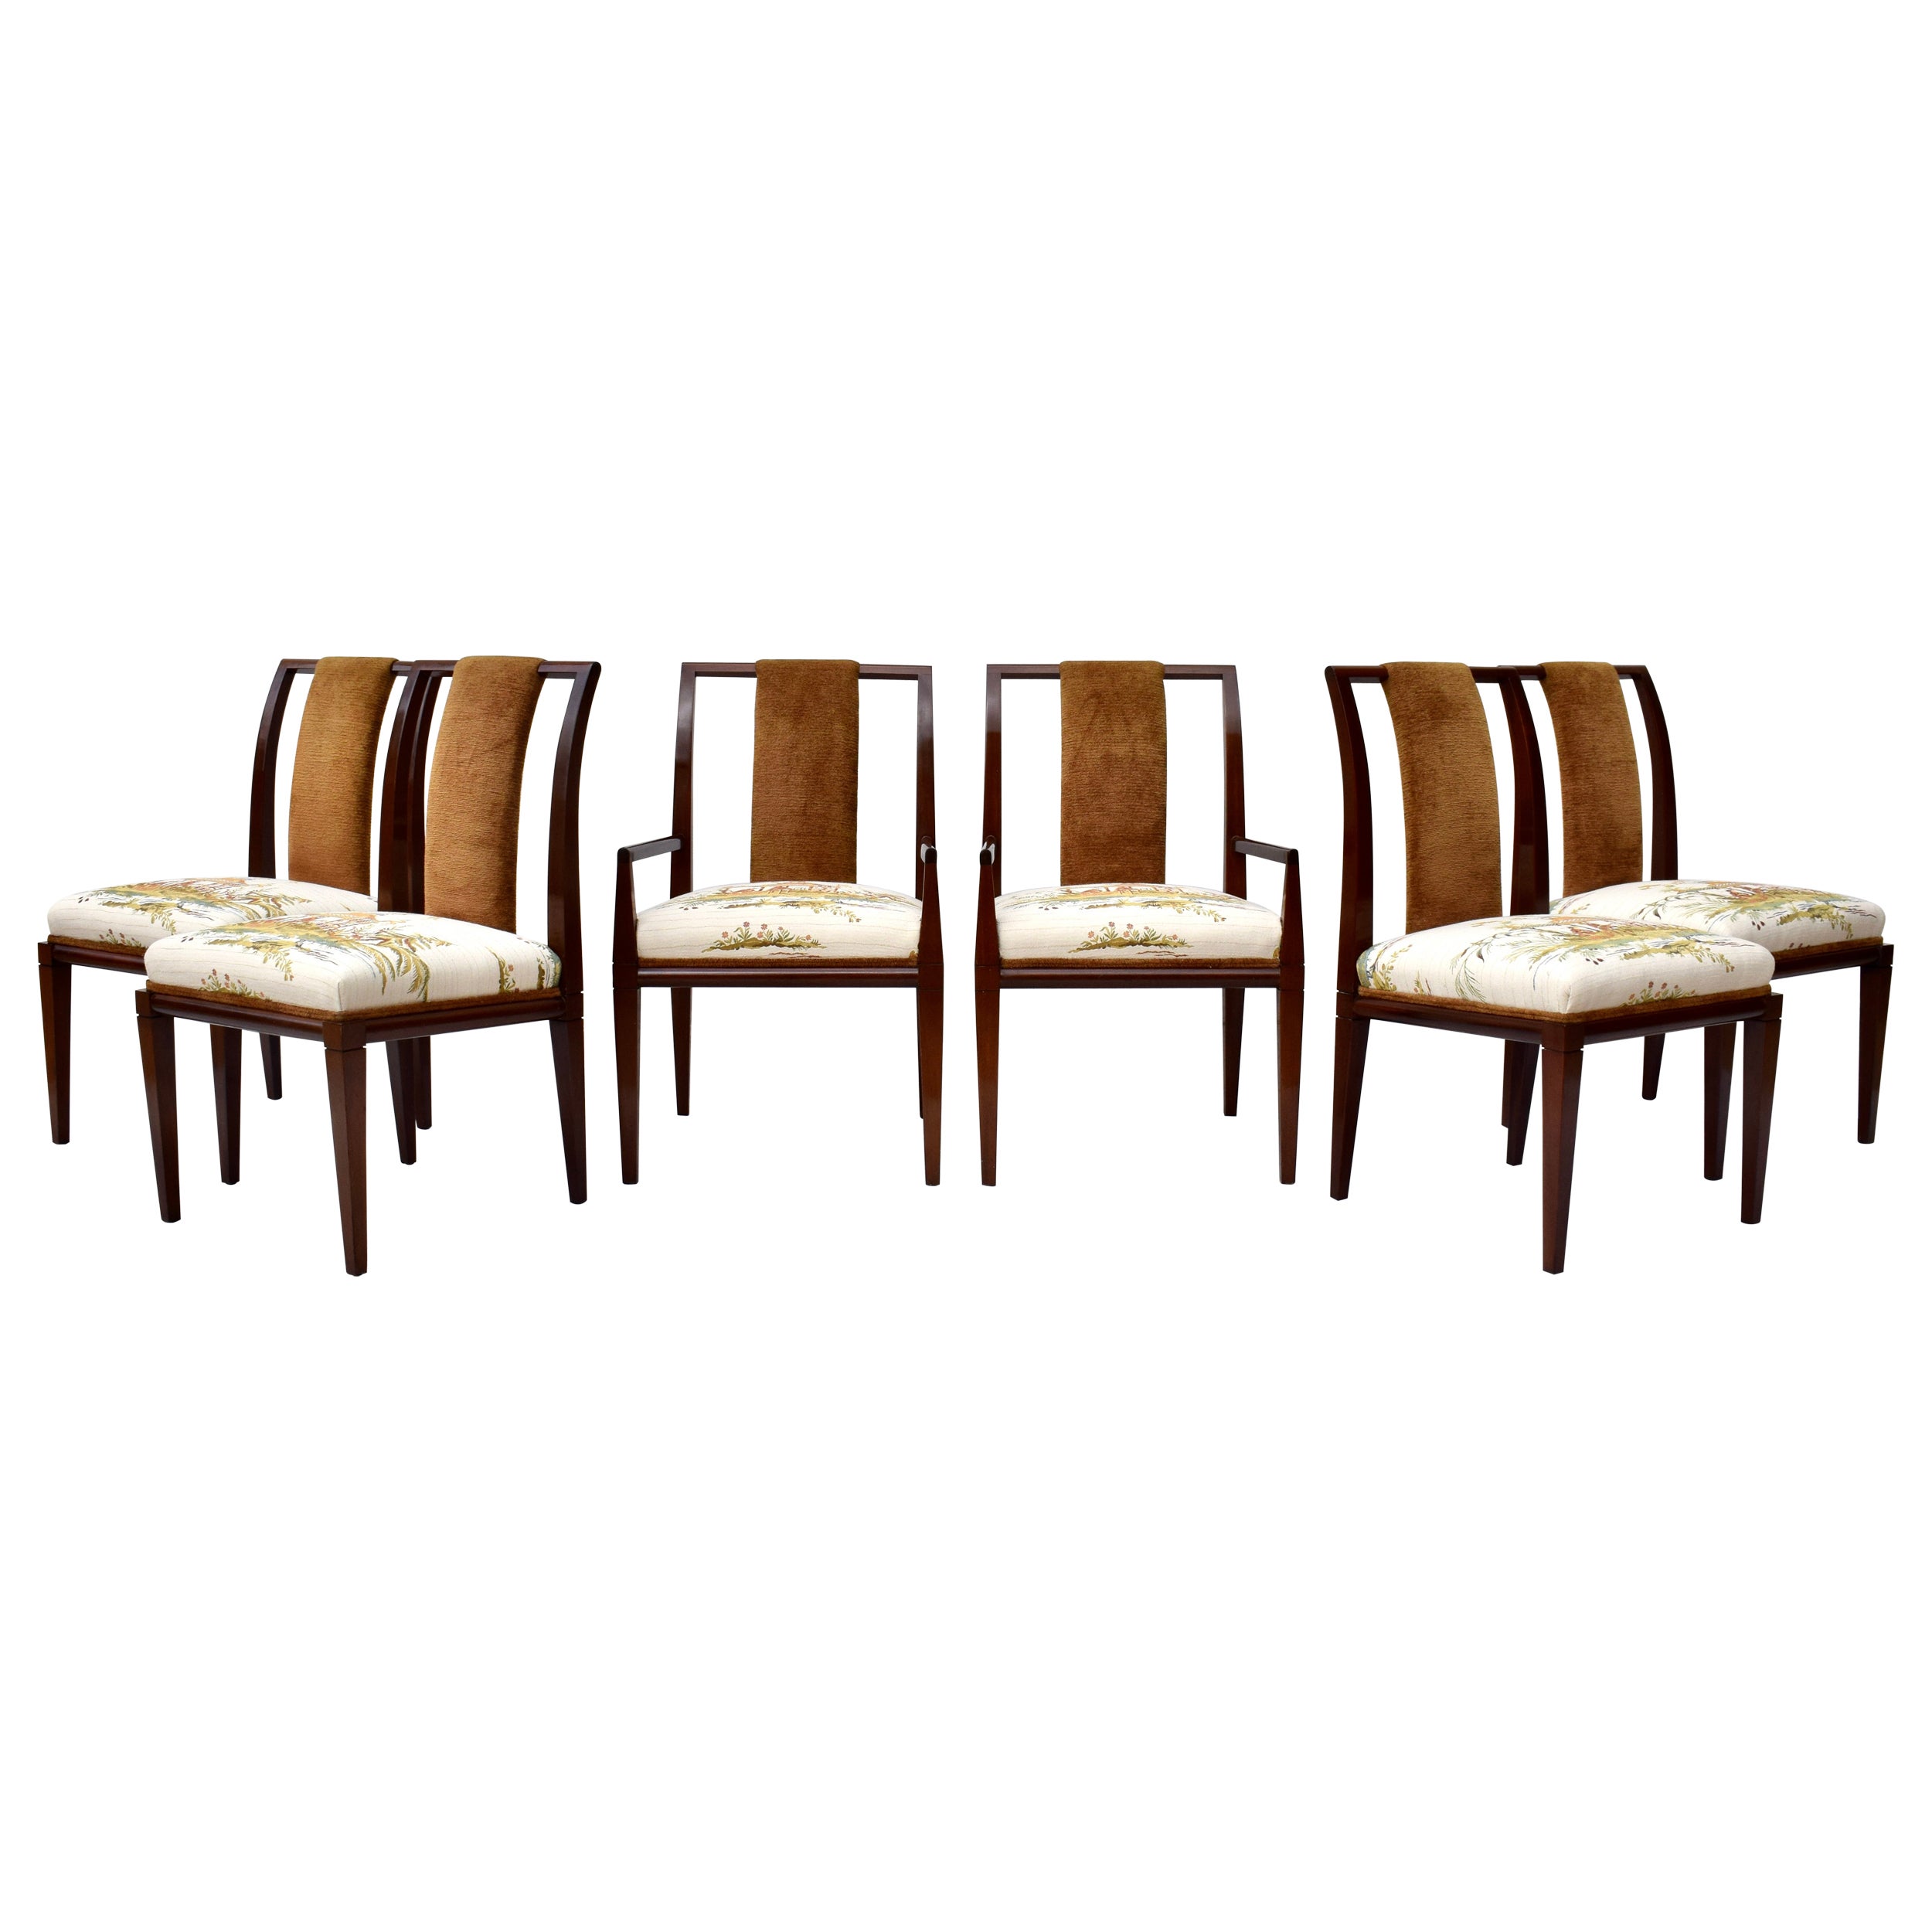 1950's Tommi Parzinger Dining Chairs in Brunschwig & Fils